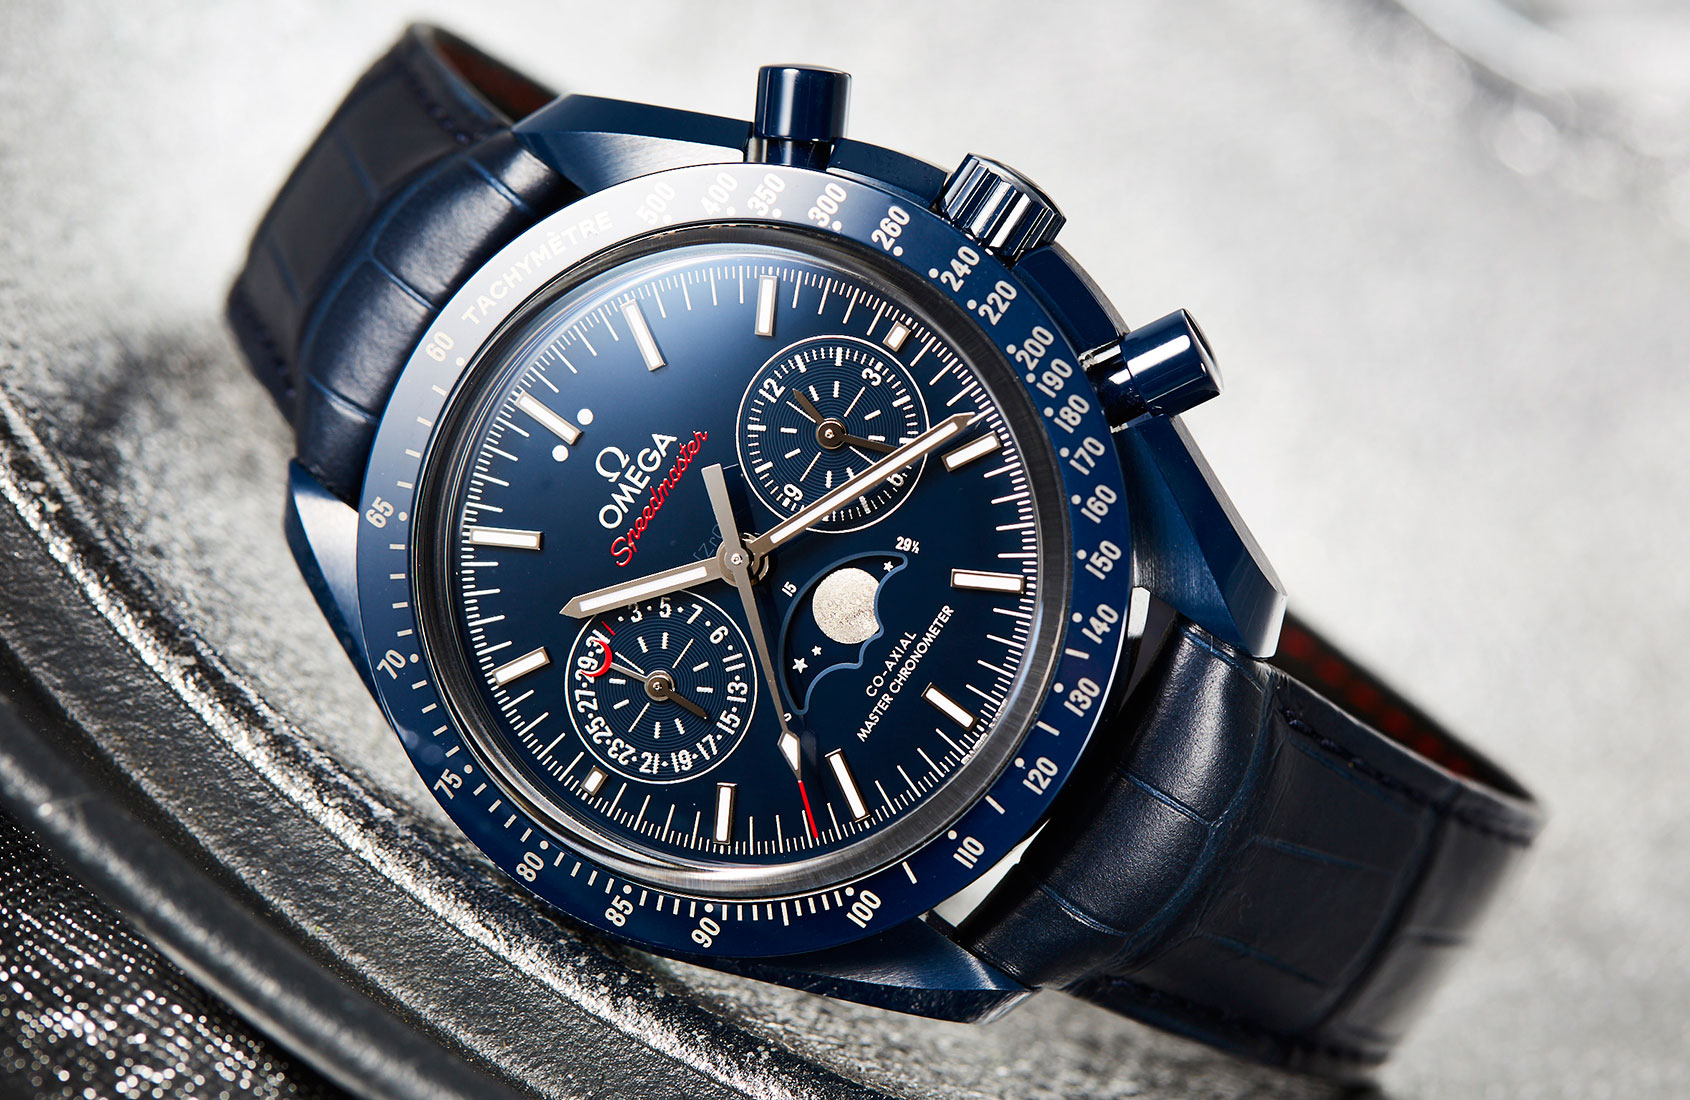 Taking another look at the Omega Speedmaster - Blue Side Of The Moon